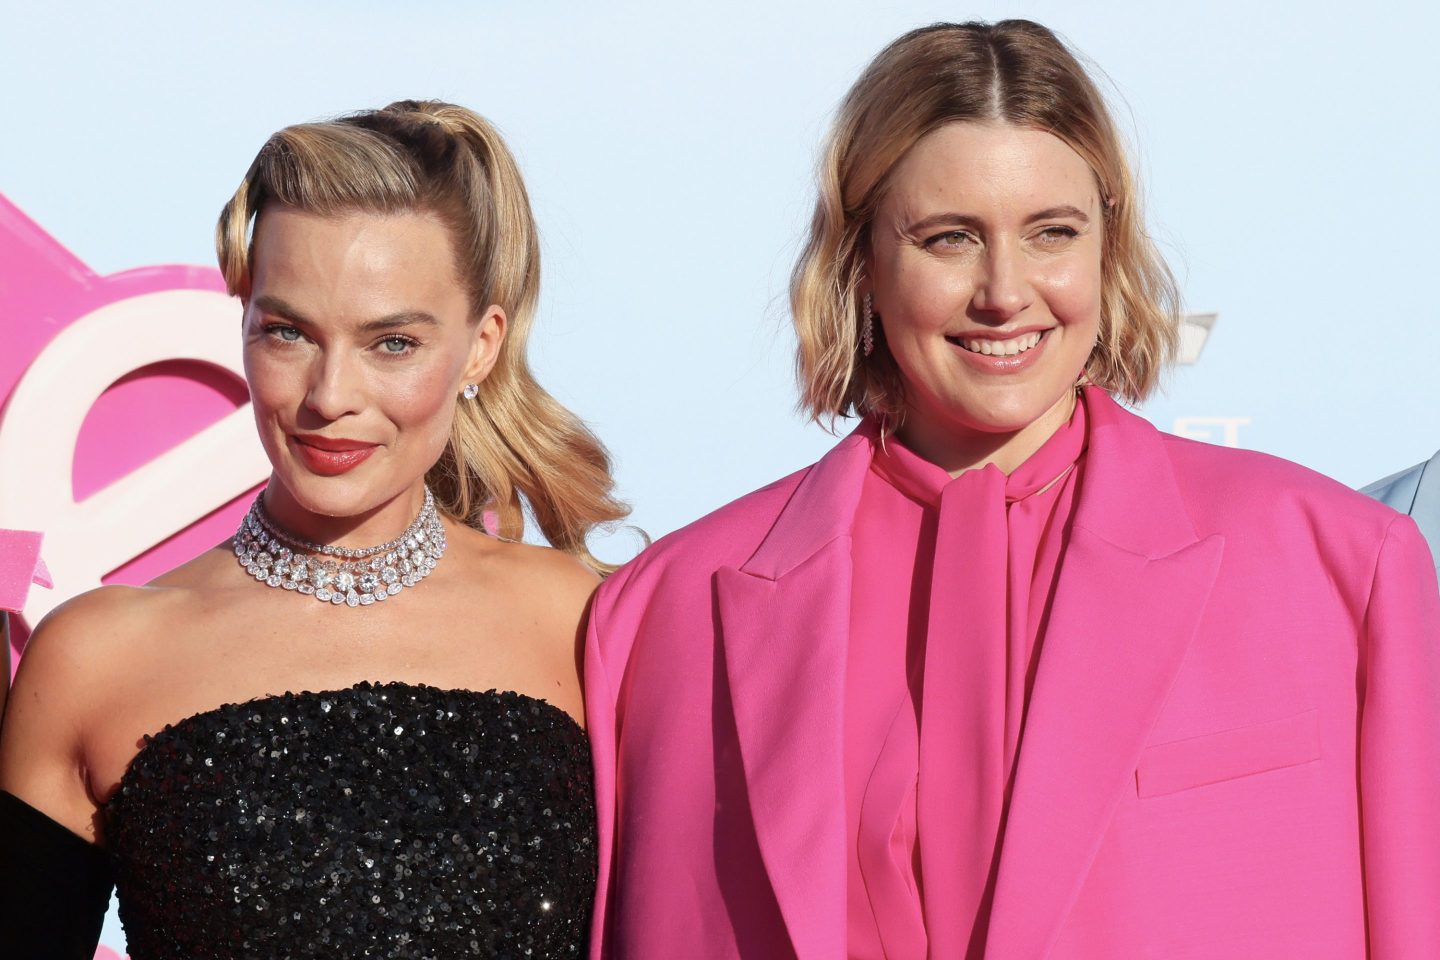 LOS ANGELES, CALIFORNIA &#8211; JULY 09: Margot Robbie and Greta Gerwig attend the World Premiere of &#8220;Barbie&#8221; at Shrine Auditorium and Expo Hall on July 09, 2023 in Los Angeles, California. (Photo by Rodin Eckenroth/WireImage)